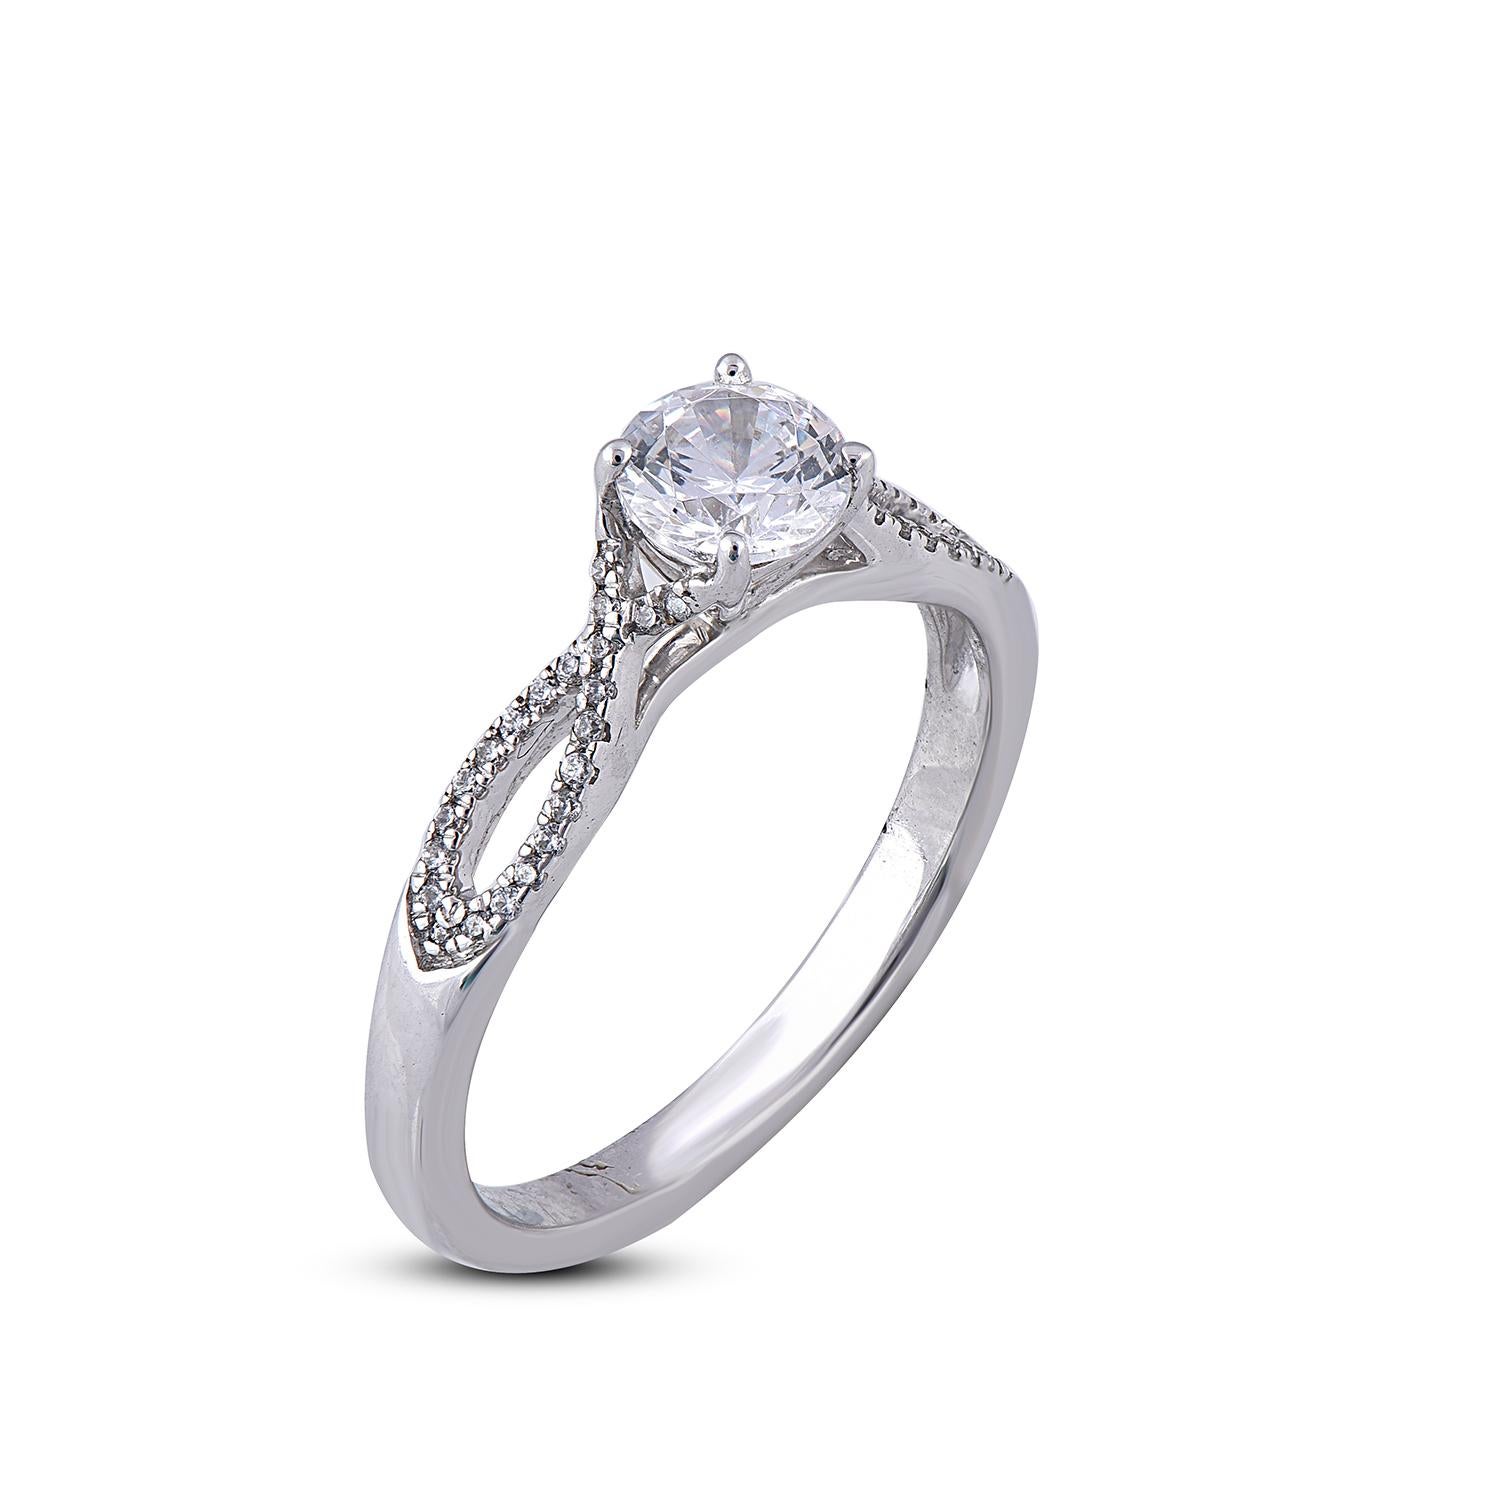 A sweet symbol of your everlasting romance, expertly crafted in 18 Karat white gold and shines with 0.65ct center stone and 0.10ct adorning the shank made in Prong and pave setting and glittering in 45 round diamond with G-H color SI1-2 clarity,